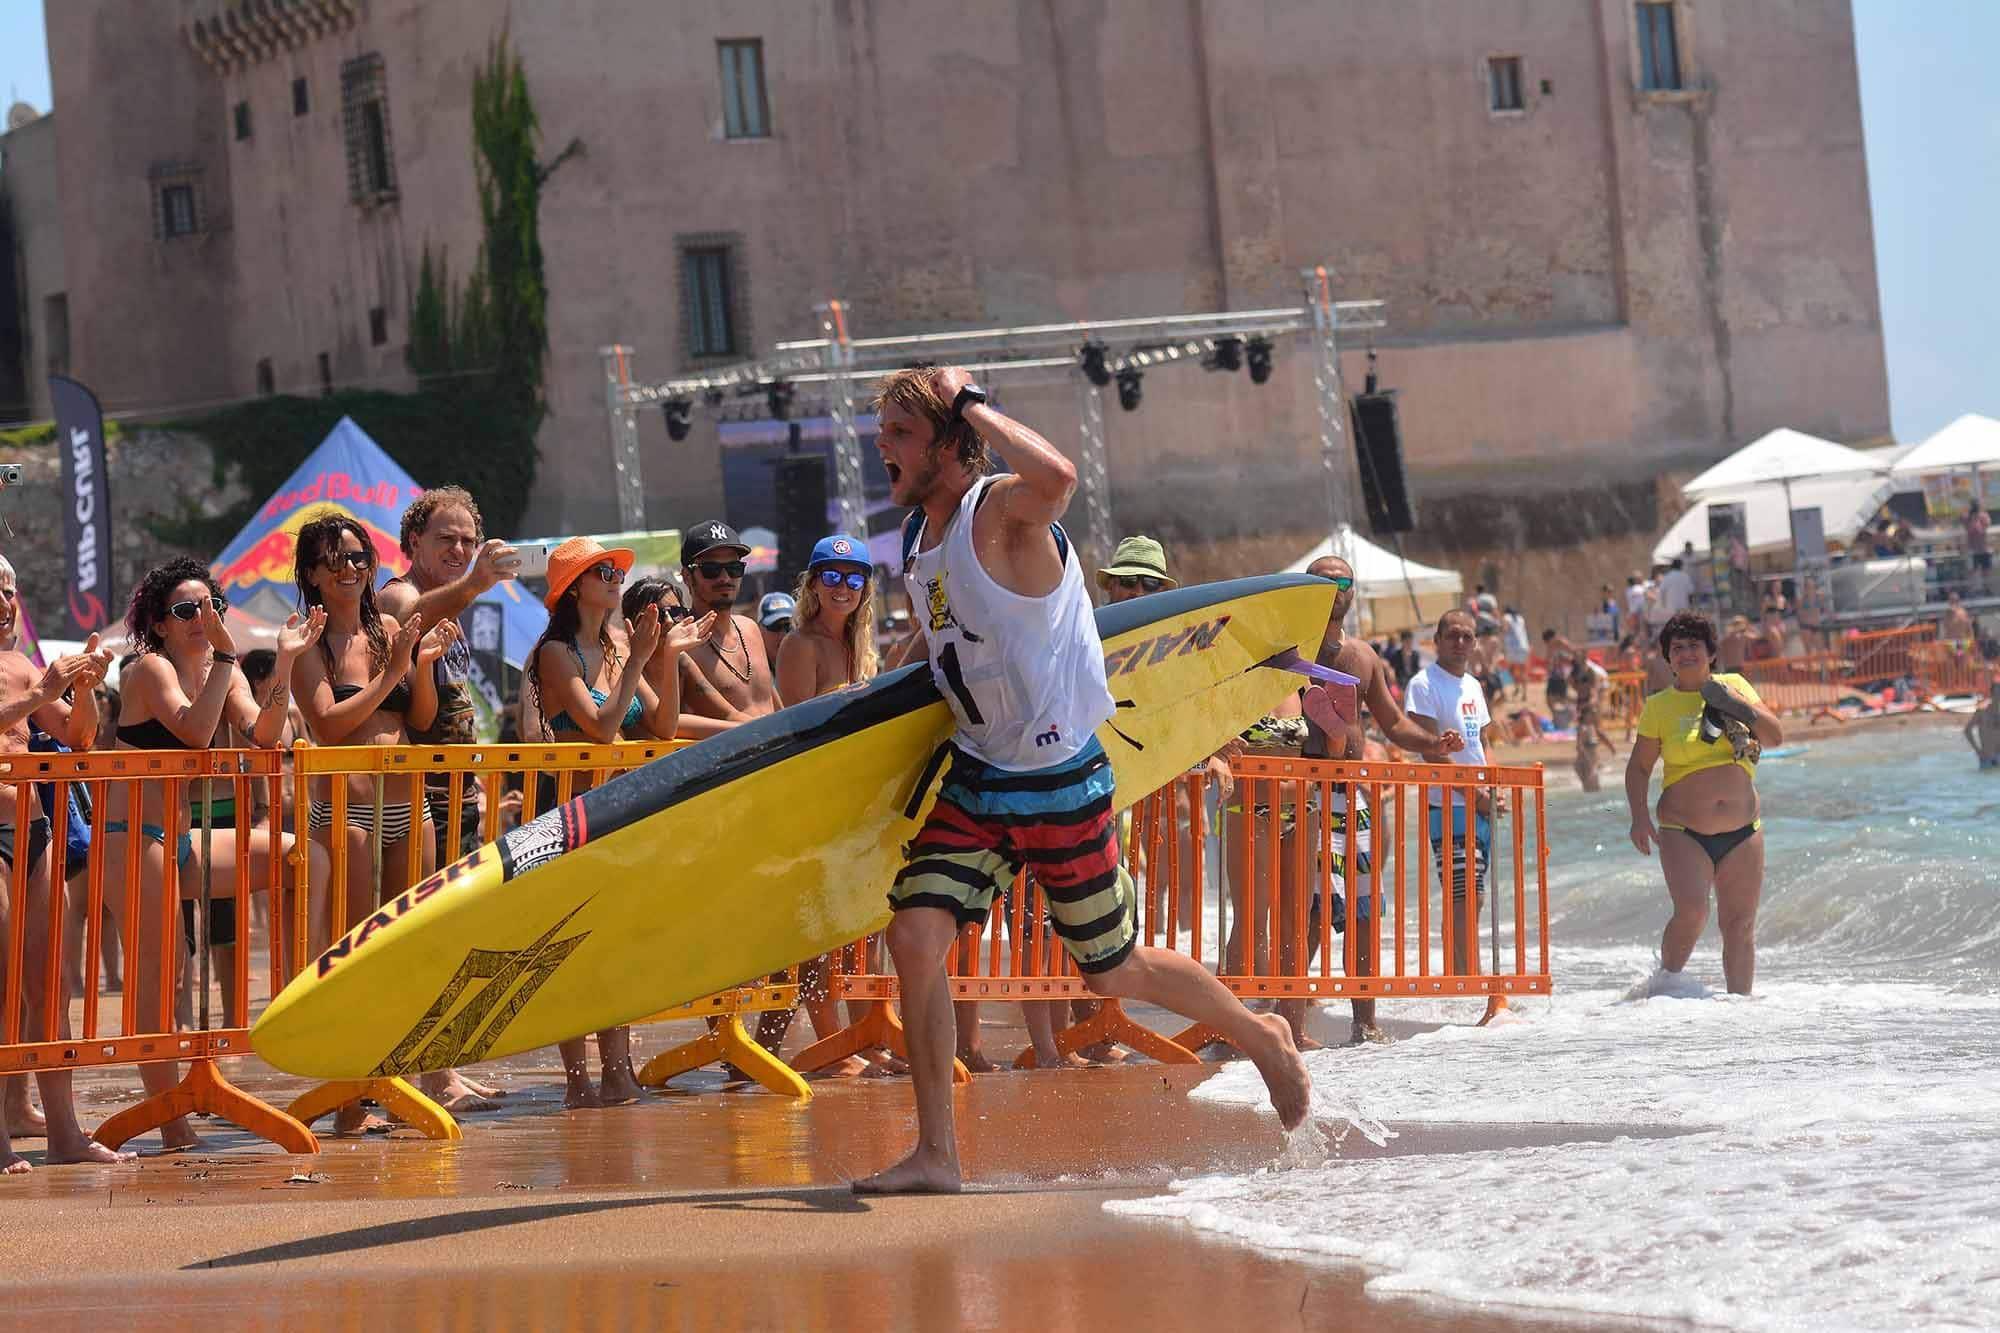 Casper Steinfath Crowned 2015 European Cup Champion for Third Year in a Row - Naish.com